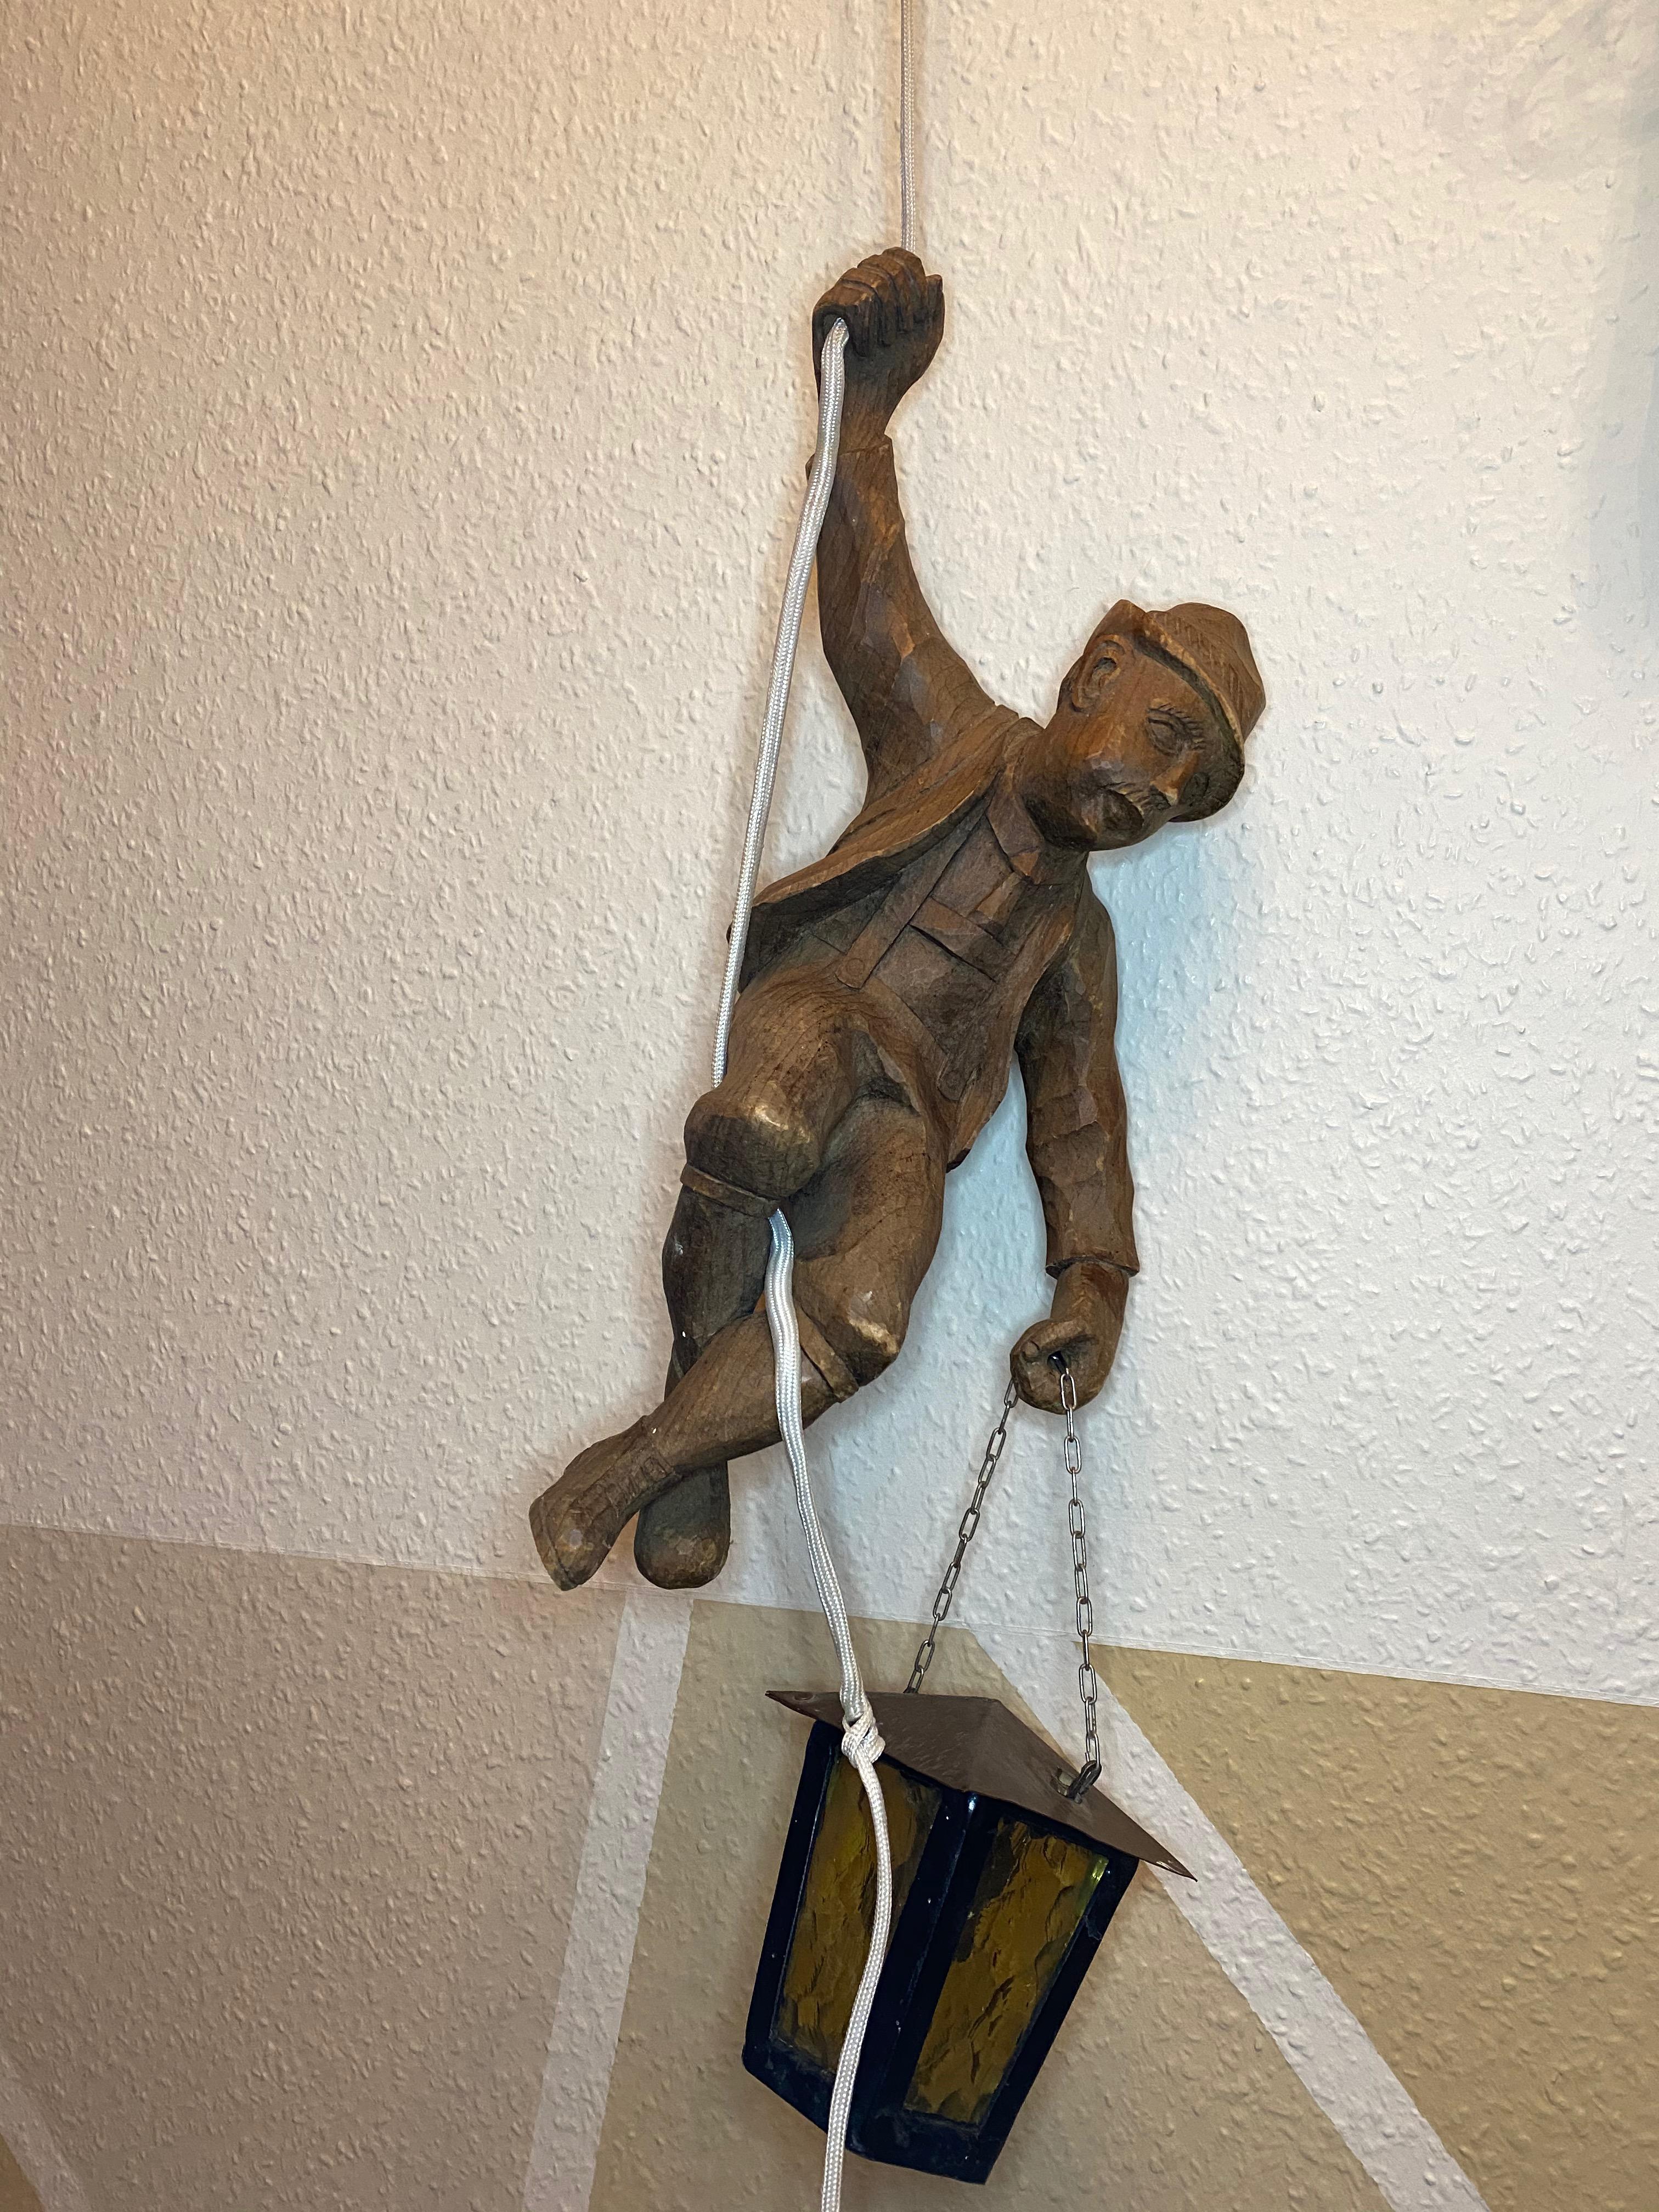 Stunning very rare hand carved Black Forest style wood mountain climber lantern or ceiling light. Pendant lamp off a mountain climber hanging from a rope with a lantern in his hand. Carved Figure is approx. 16